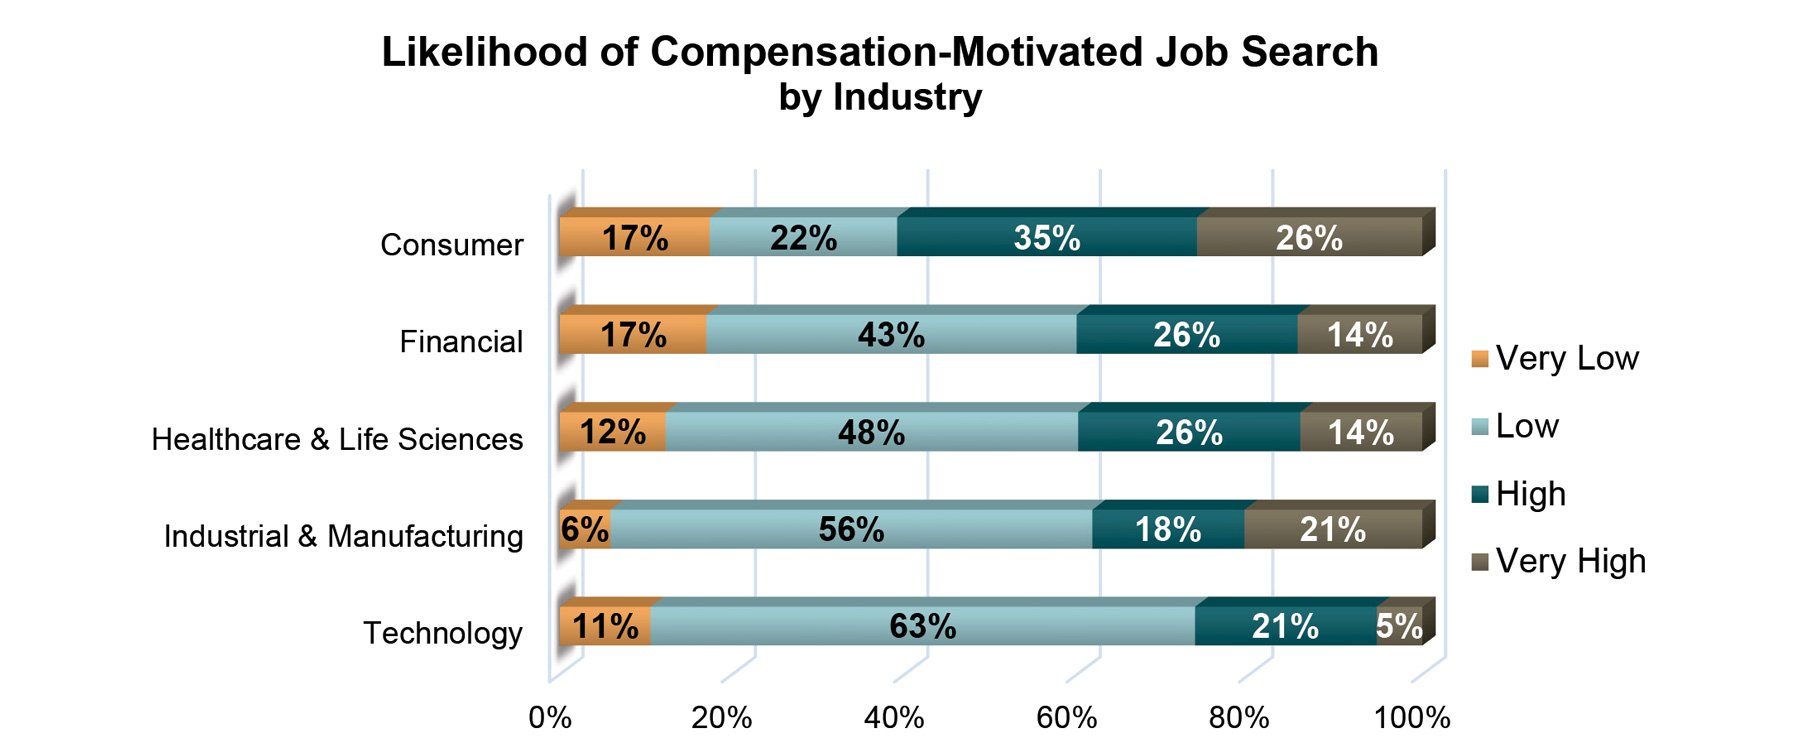 Likelihood of Compensation-Motivated Job Search by Industry